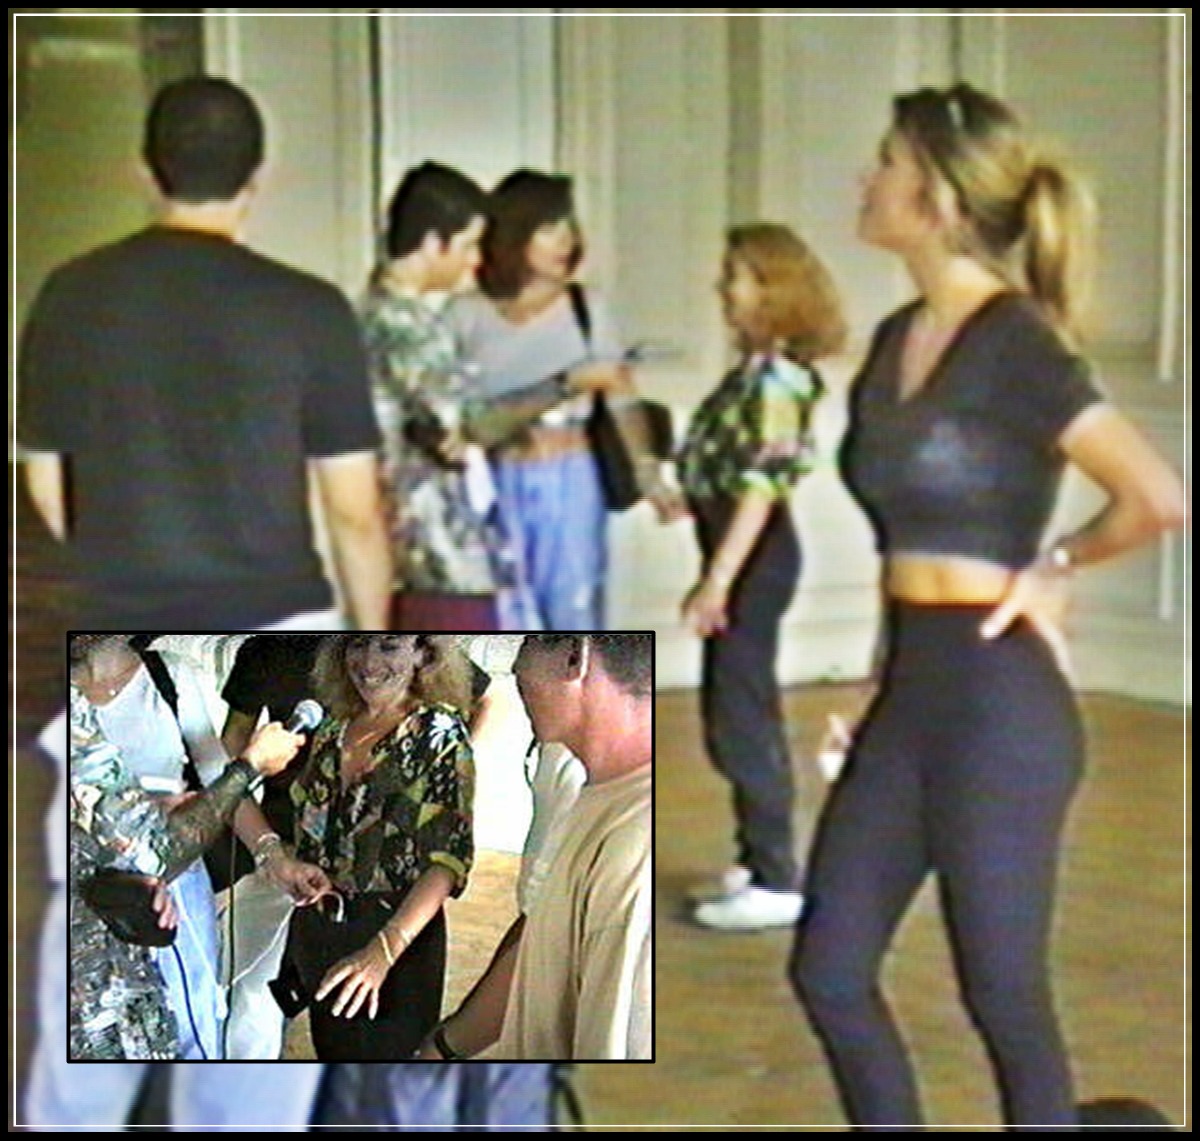 Summer 1997 - Daena Smoller takes Riki Rachtman (Headbangers Ball / MTV) and crew on a GHOST EXPEDITION through haunted hotspots in L.A. after Rachtman participated in a VIP Private Ghost Expedition a year earlier in New Orleans.